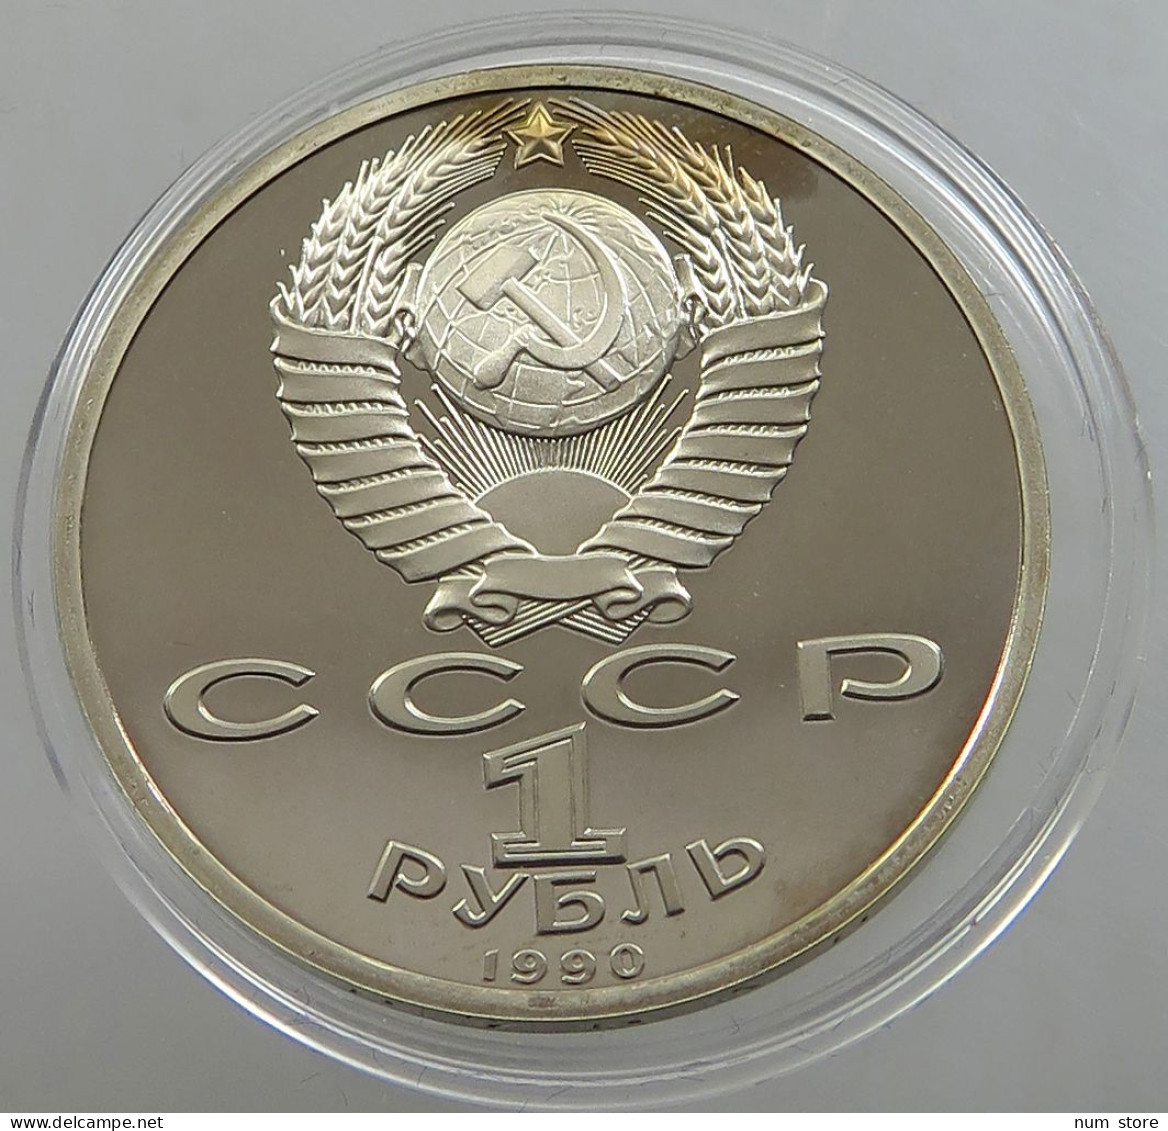 RUSSIA USSR 1 ROUBLE 1990 ZHUKOV PROOF #sm14 0751 - Russia